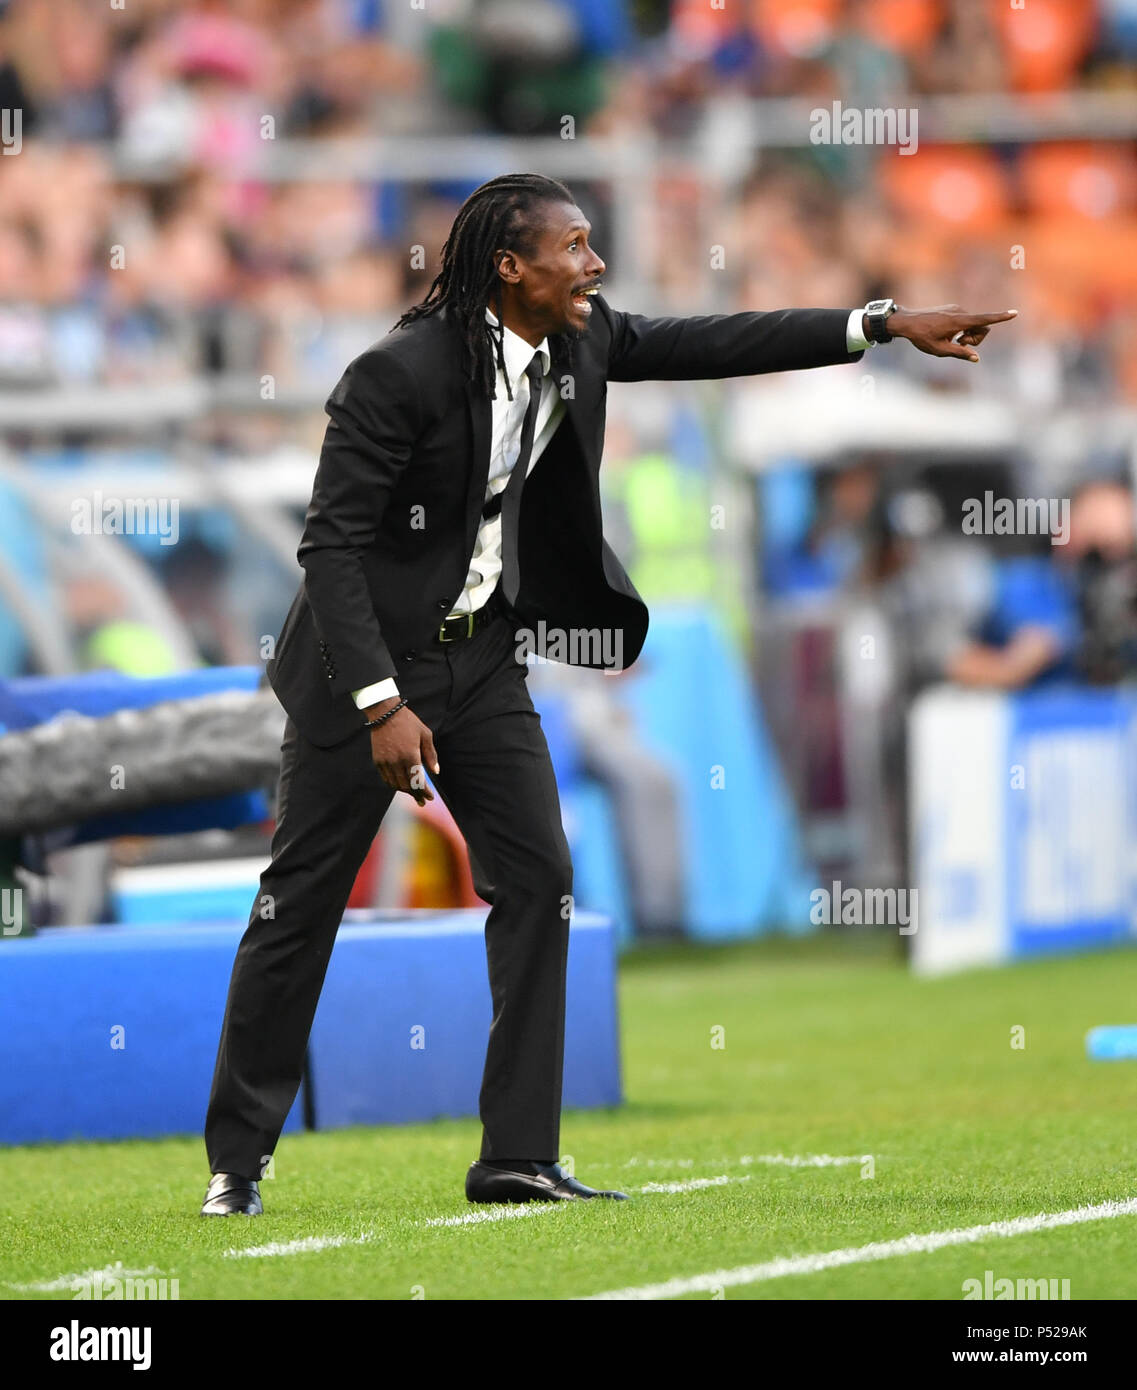 Yekaterinburg, Russia. 24th June, 2018. Senegal's head coach Aliou Cisse reacts during the 2018 FIFA World Cup Group H match between Japan and Senegal in Yekaterinburg, Russia, June 24, 2018. Credit: Liu Dawei/Xinhua/Alamy Live News Stock Photo